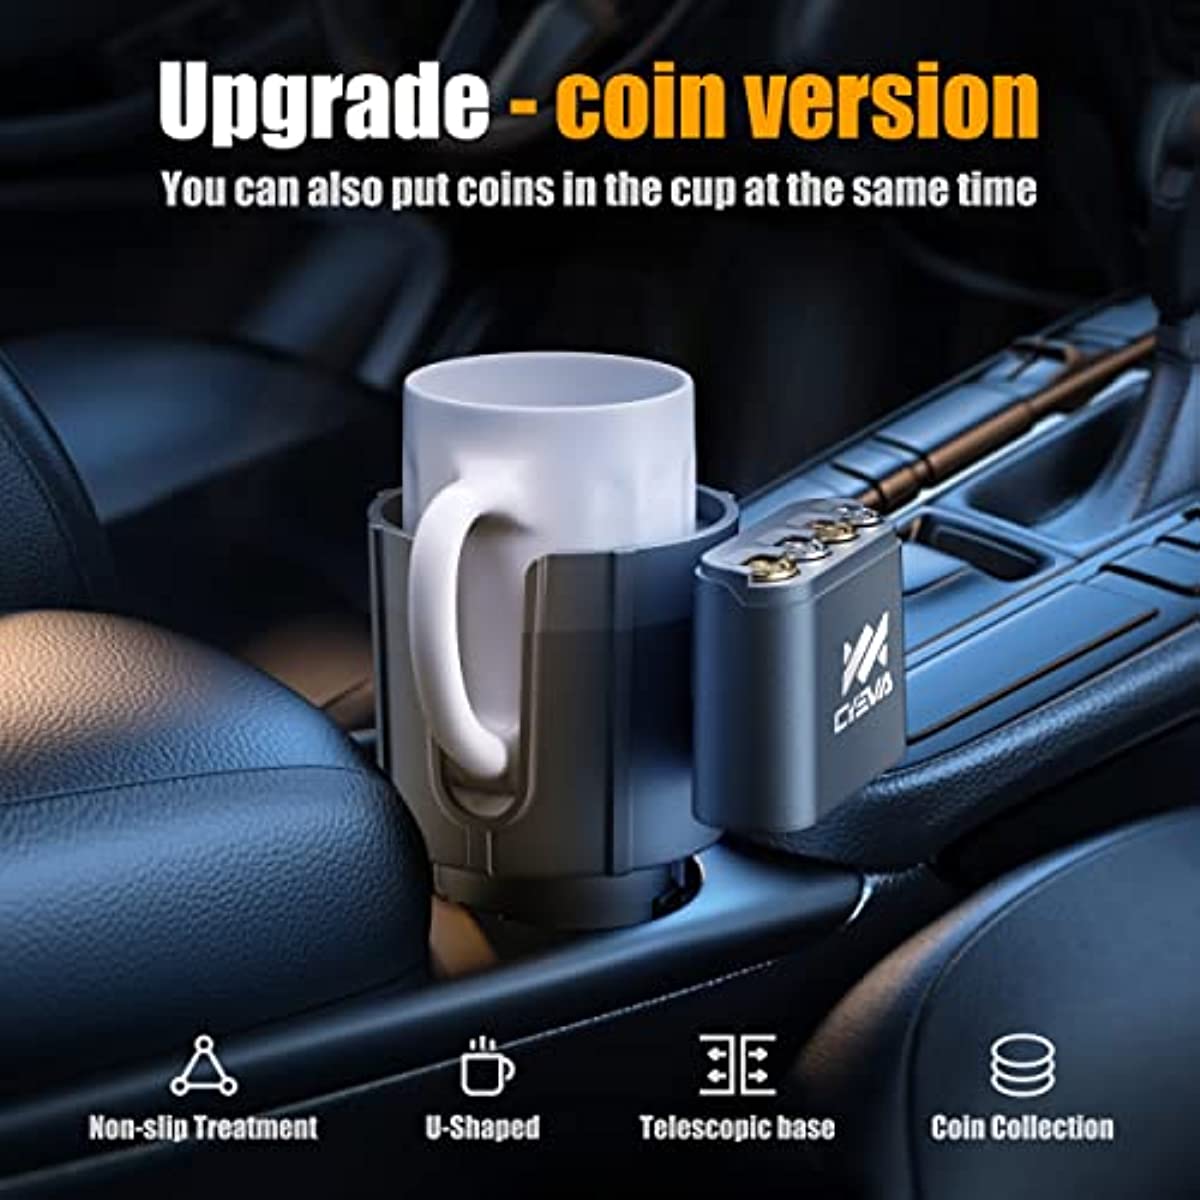 Master Show 2-in-1 Car Cup Holder Cell Phone Holder, Large Car Cup Holder  Expander with Phone Holder, Cell Phone Holder for Car, Compatible with